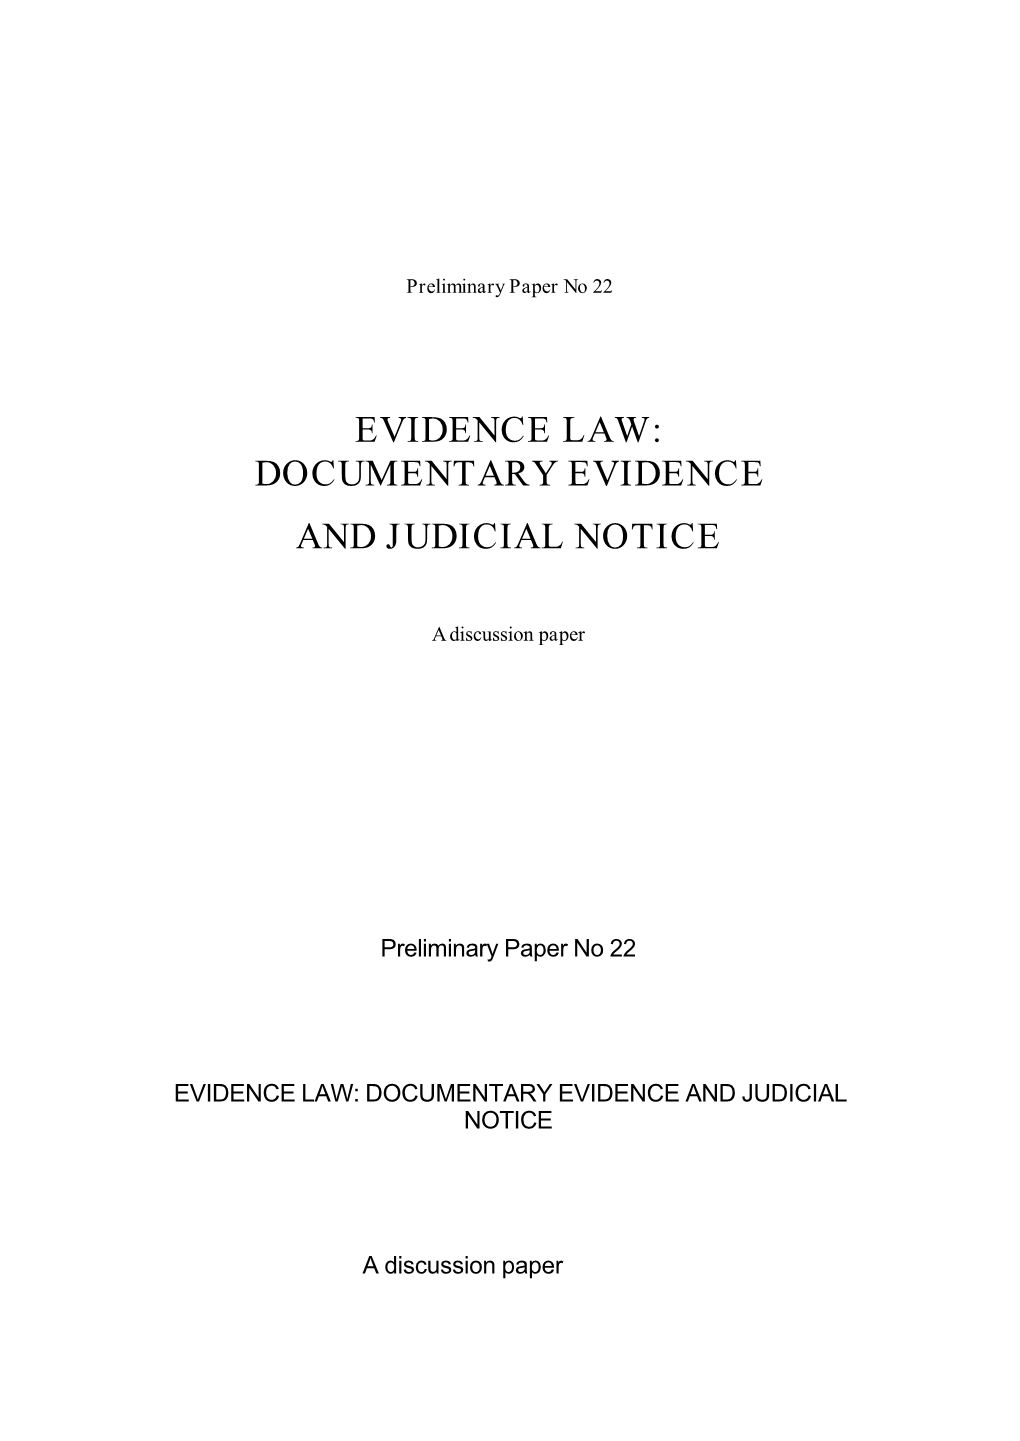 Documentary Evidence and Judicial Notice